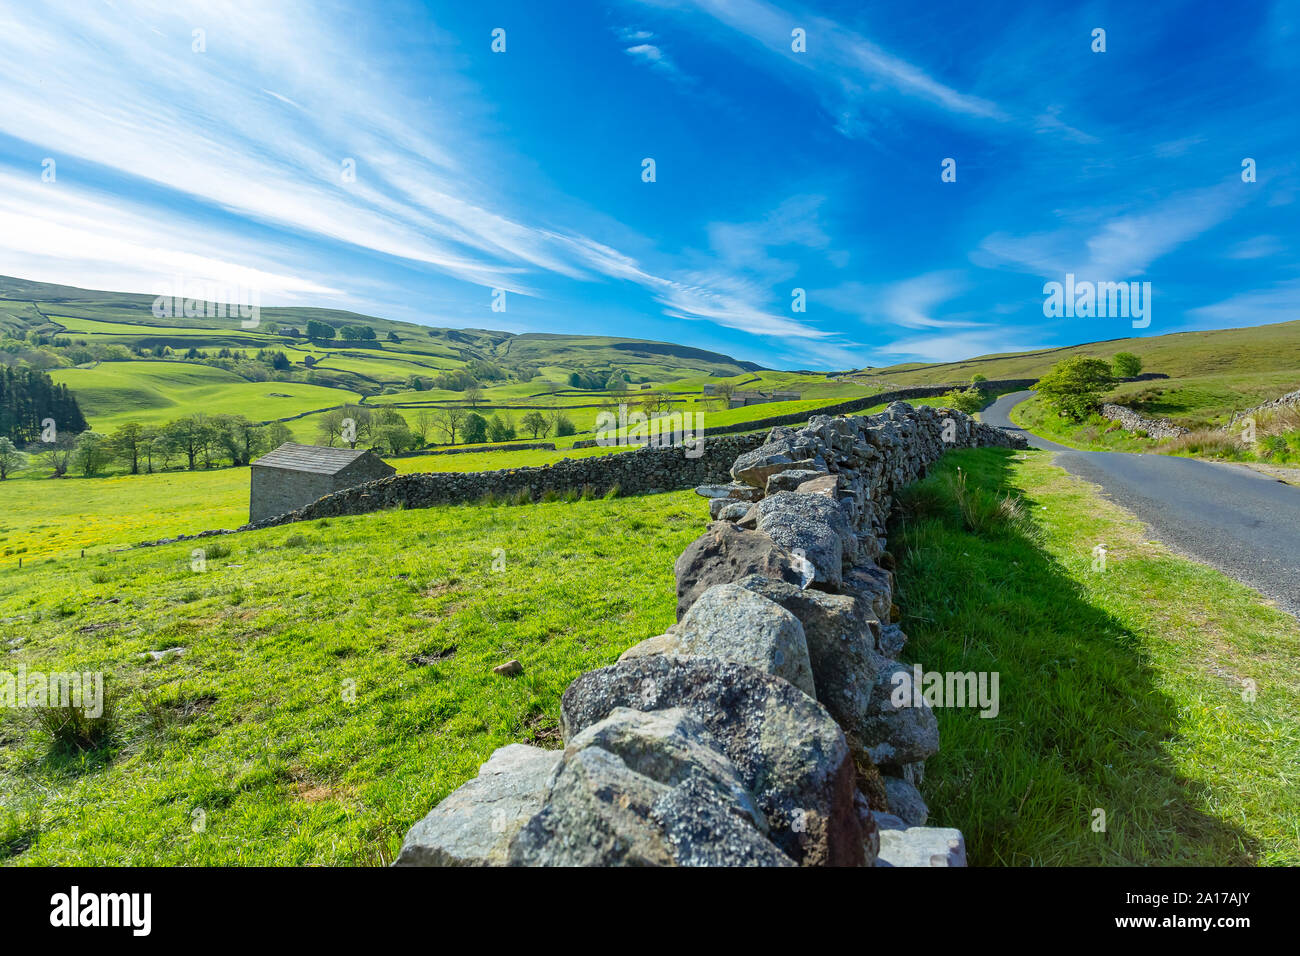 Yorkshire Dales scenic landscape.  Single track road from Askrigg to Gunnerside and Muker.  Blue sky, drystone walling and green fields. Landscape Stock Photo